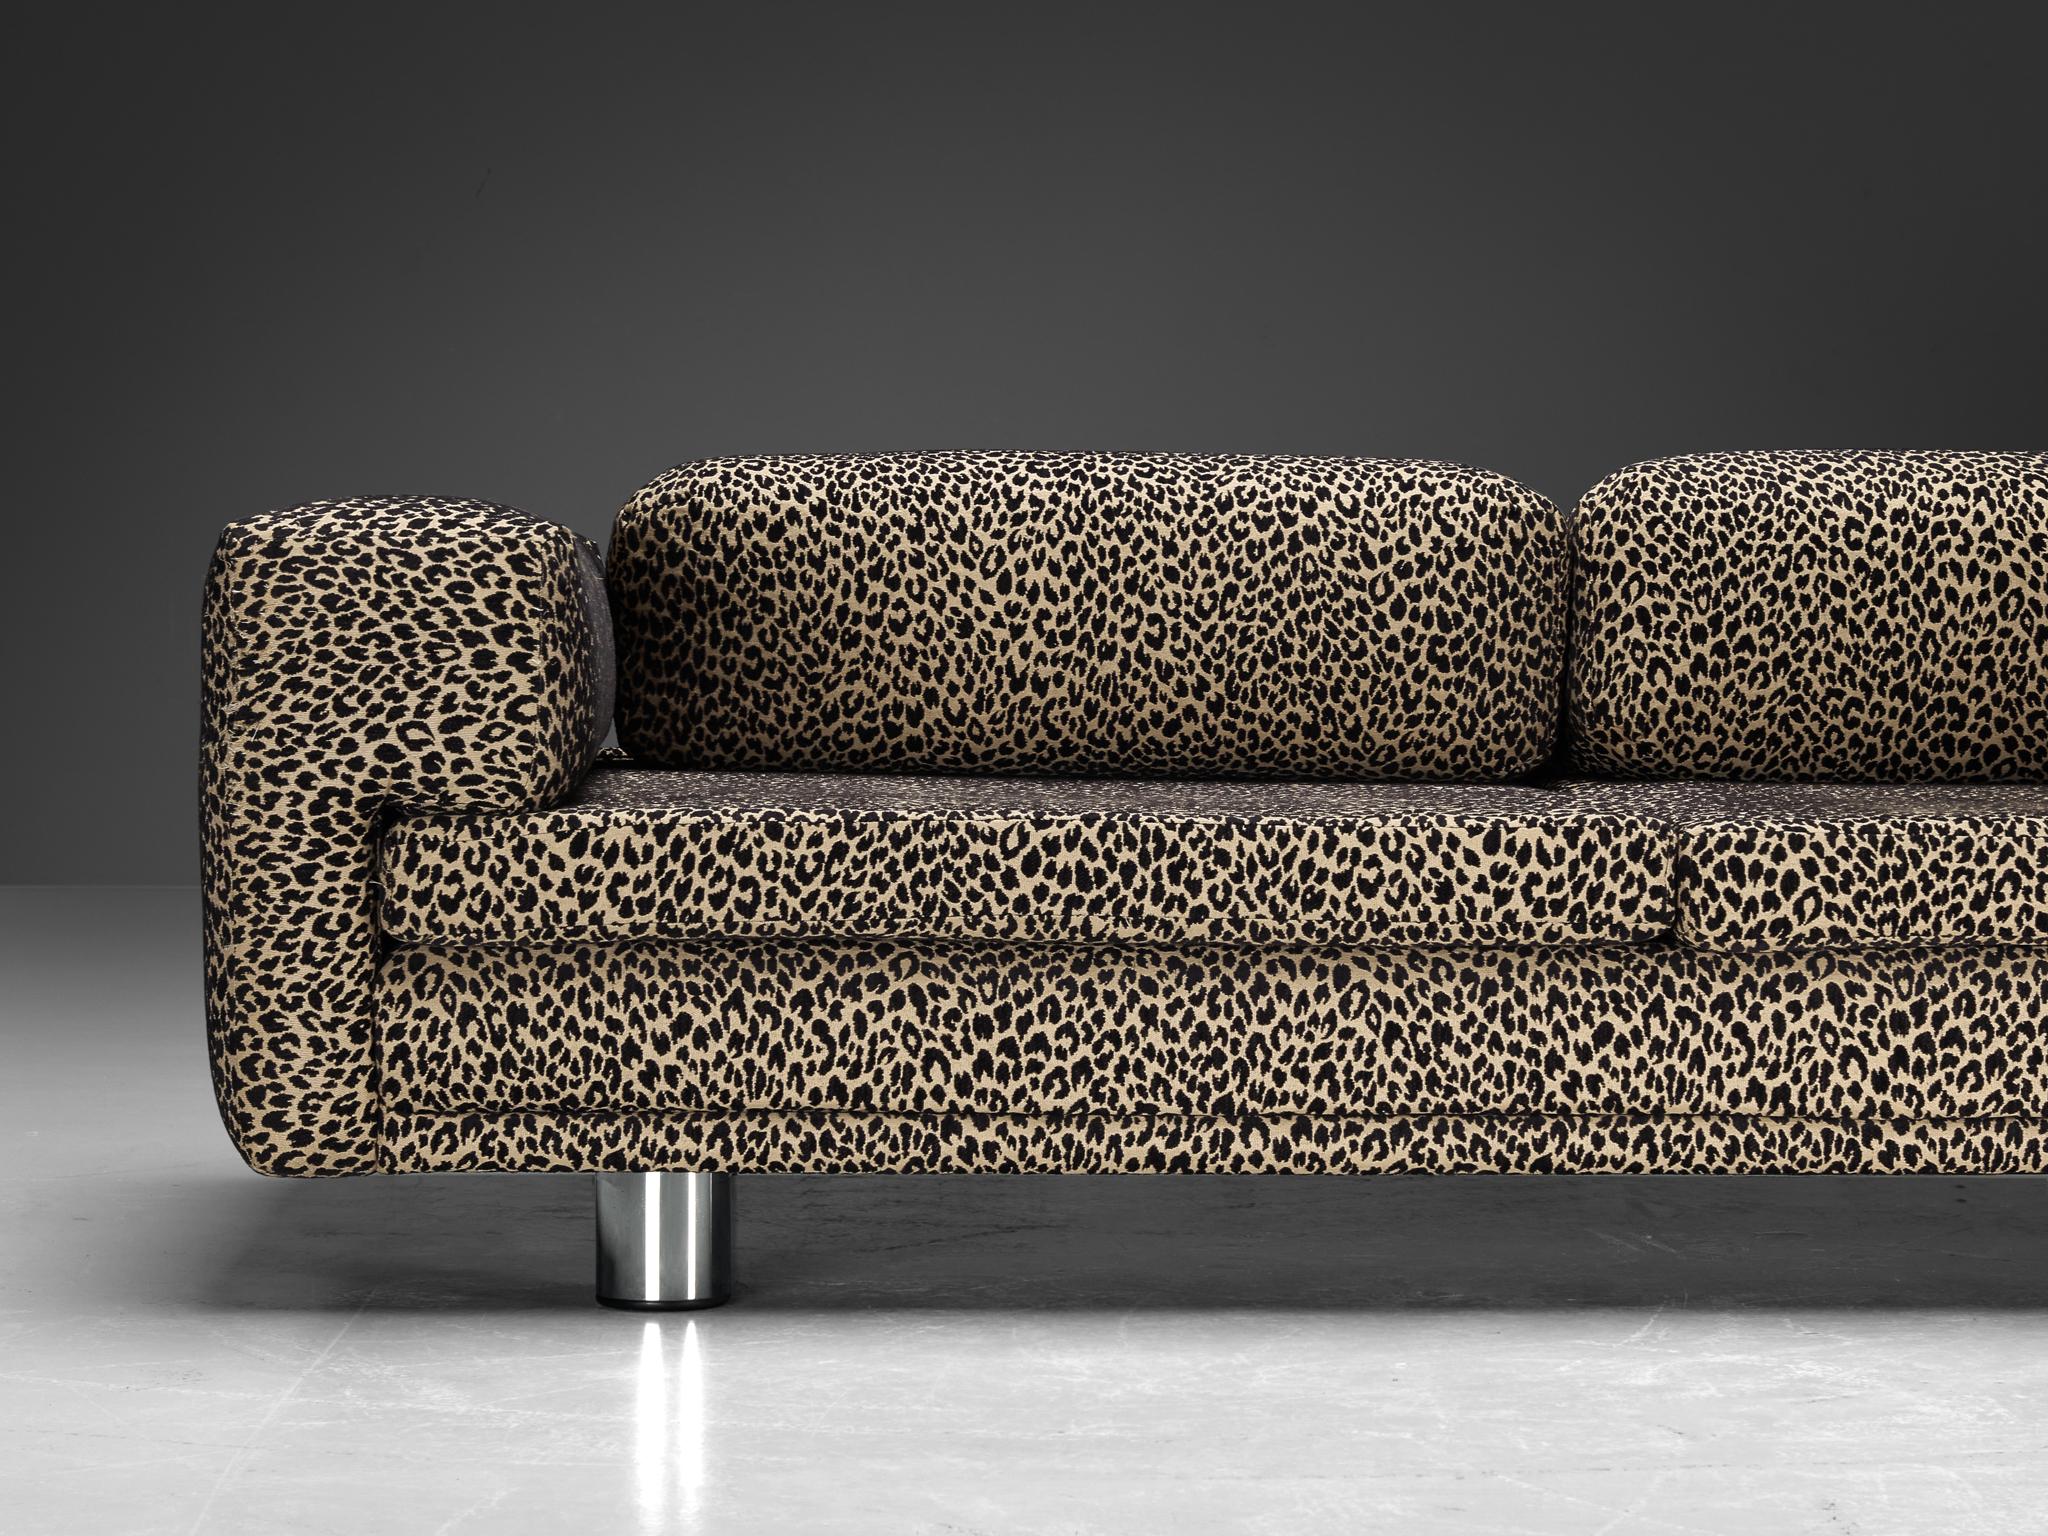 Steel Howard Keith 'Diplomat' Sofa in Leopard Print Upholstery  For Sale